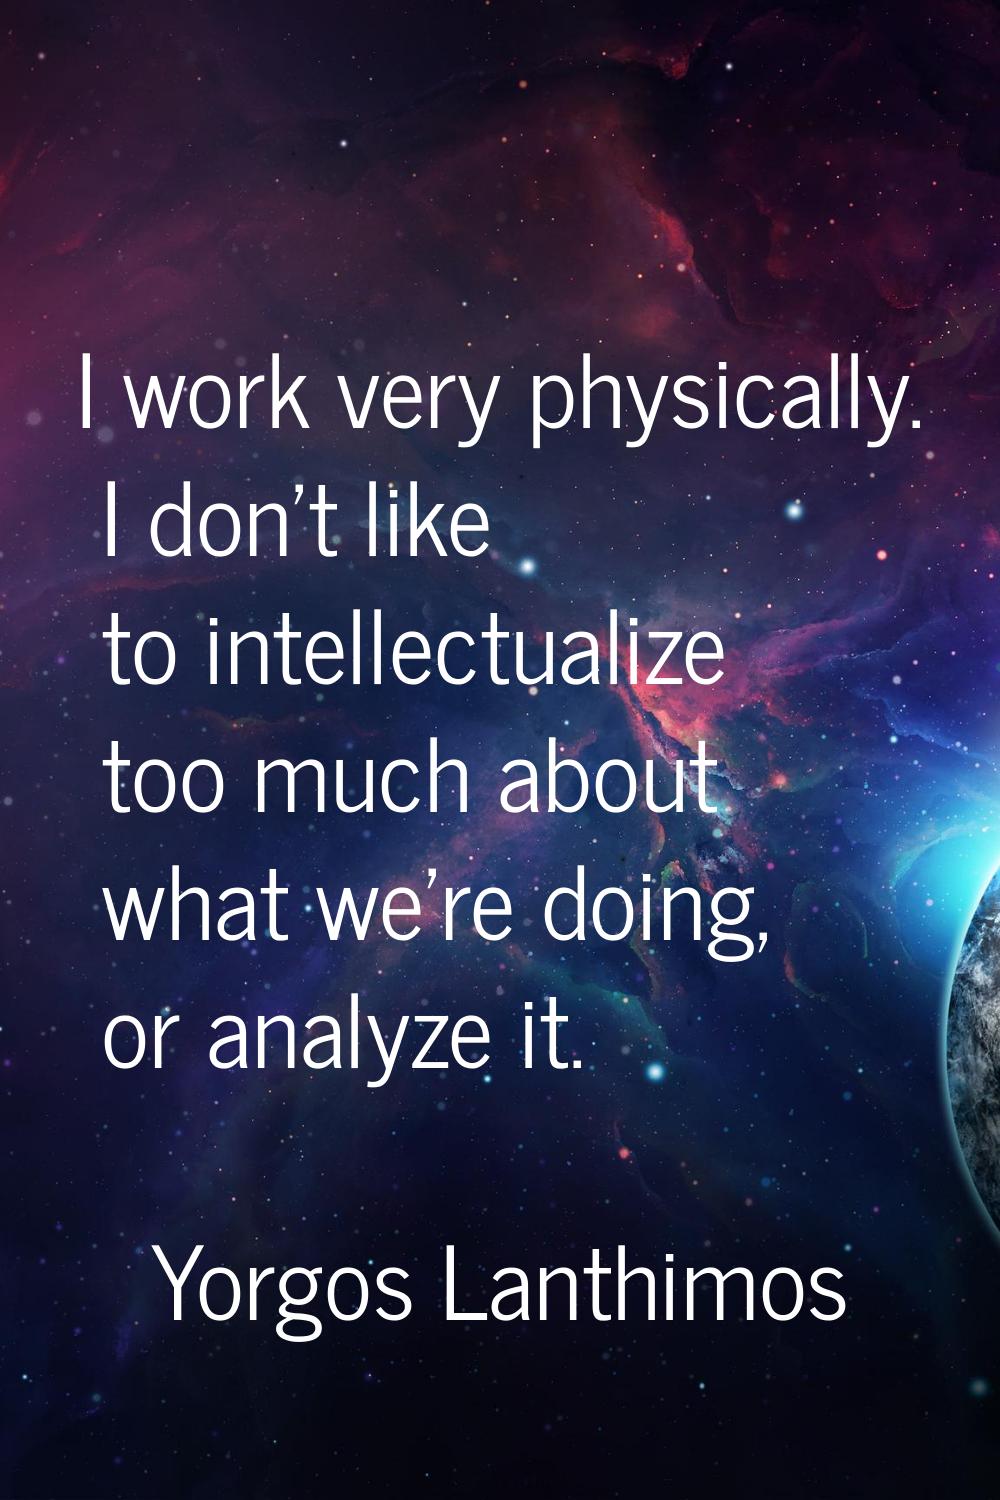 I work very physically. I don't like to intellectualize too much about what we're doing, or analyze